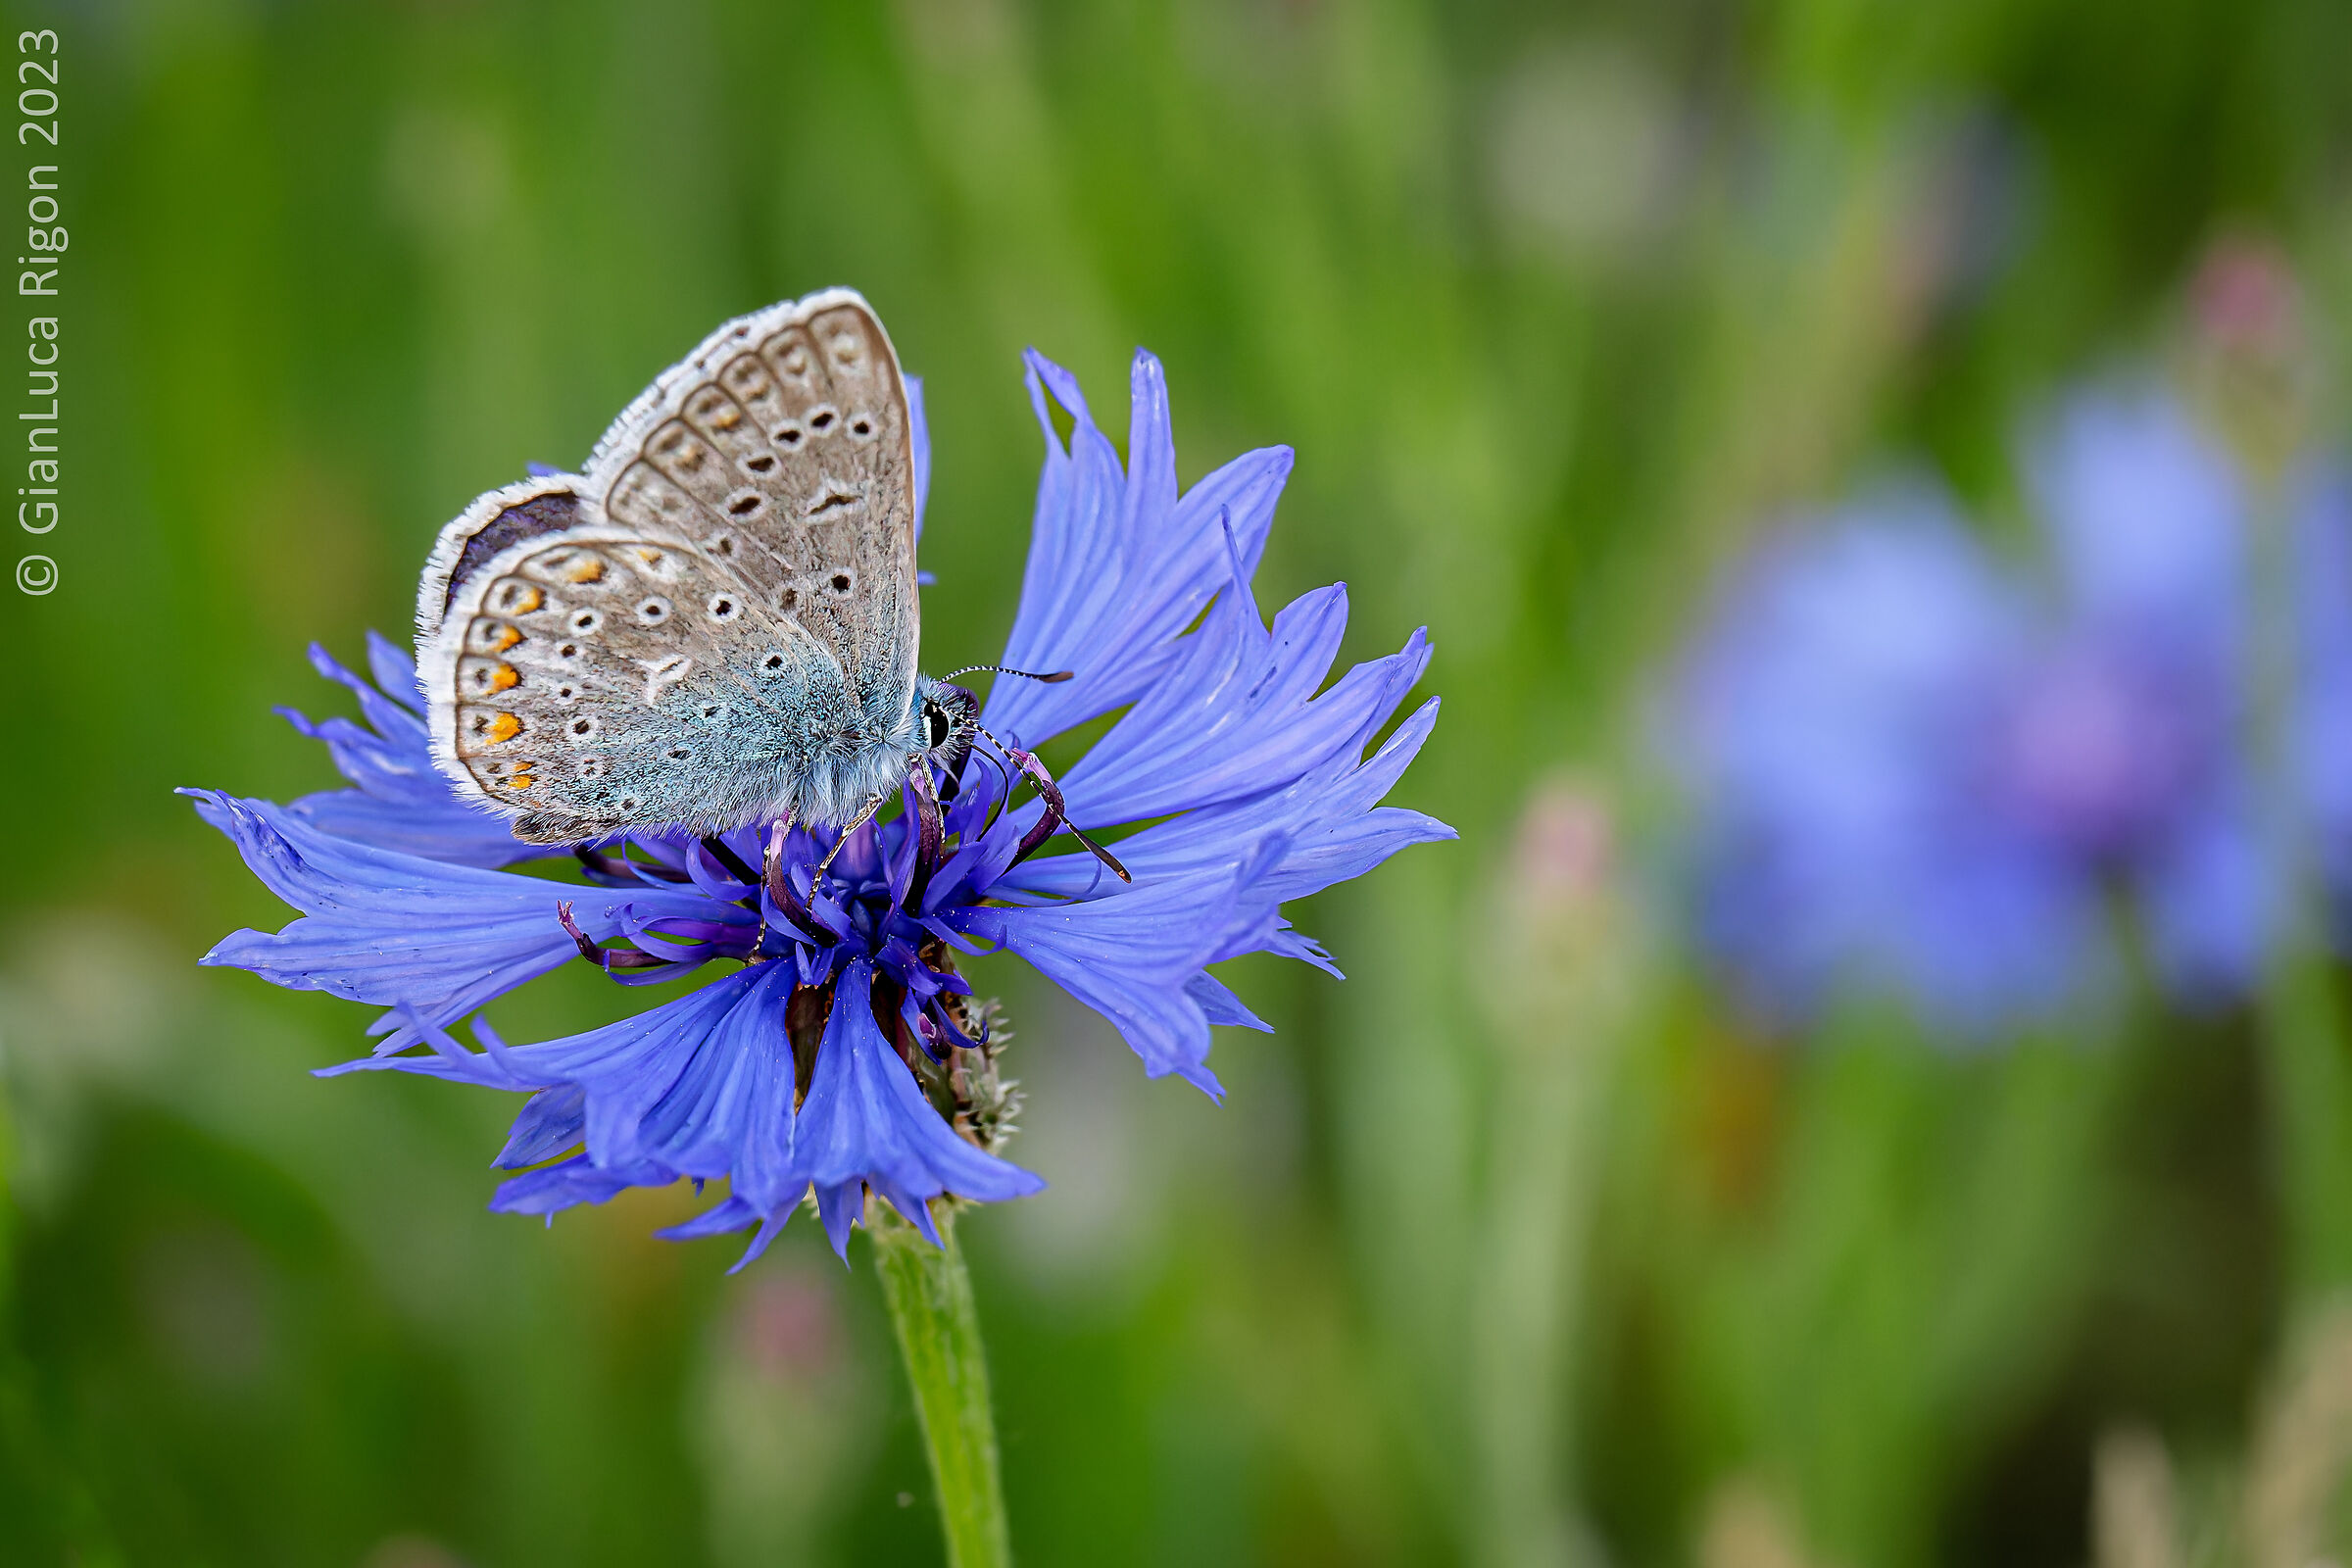 The butterfly on the cornflower...